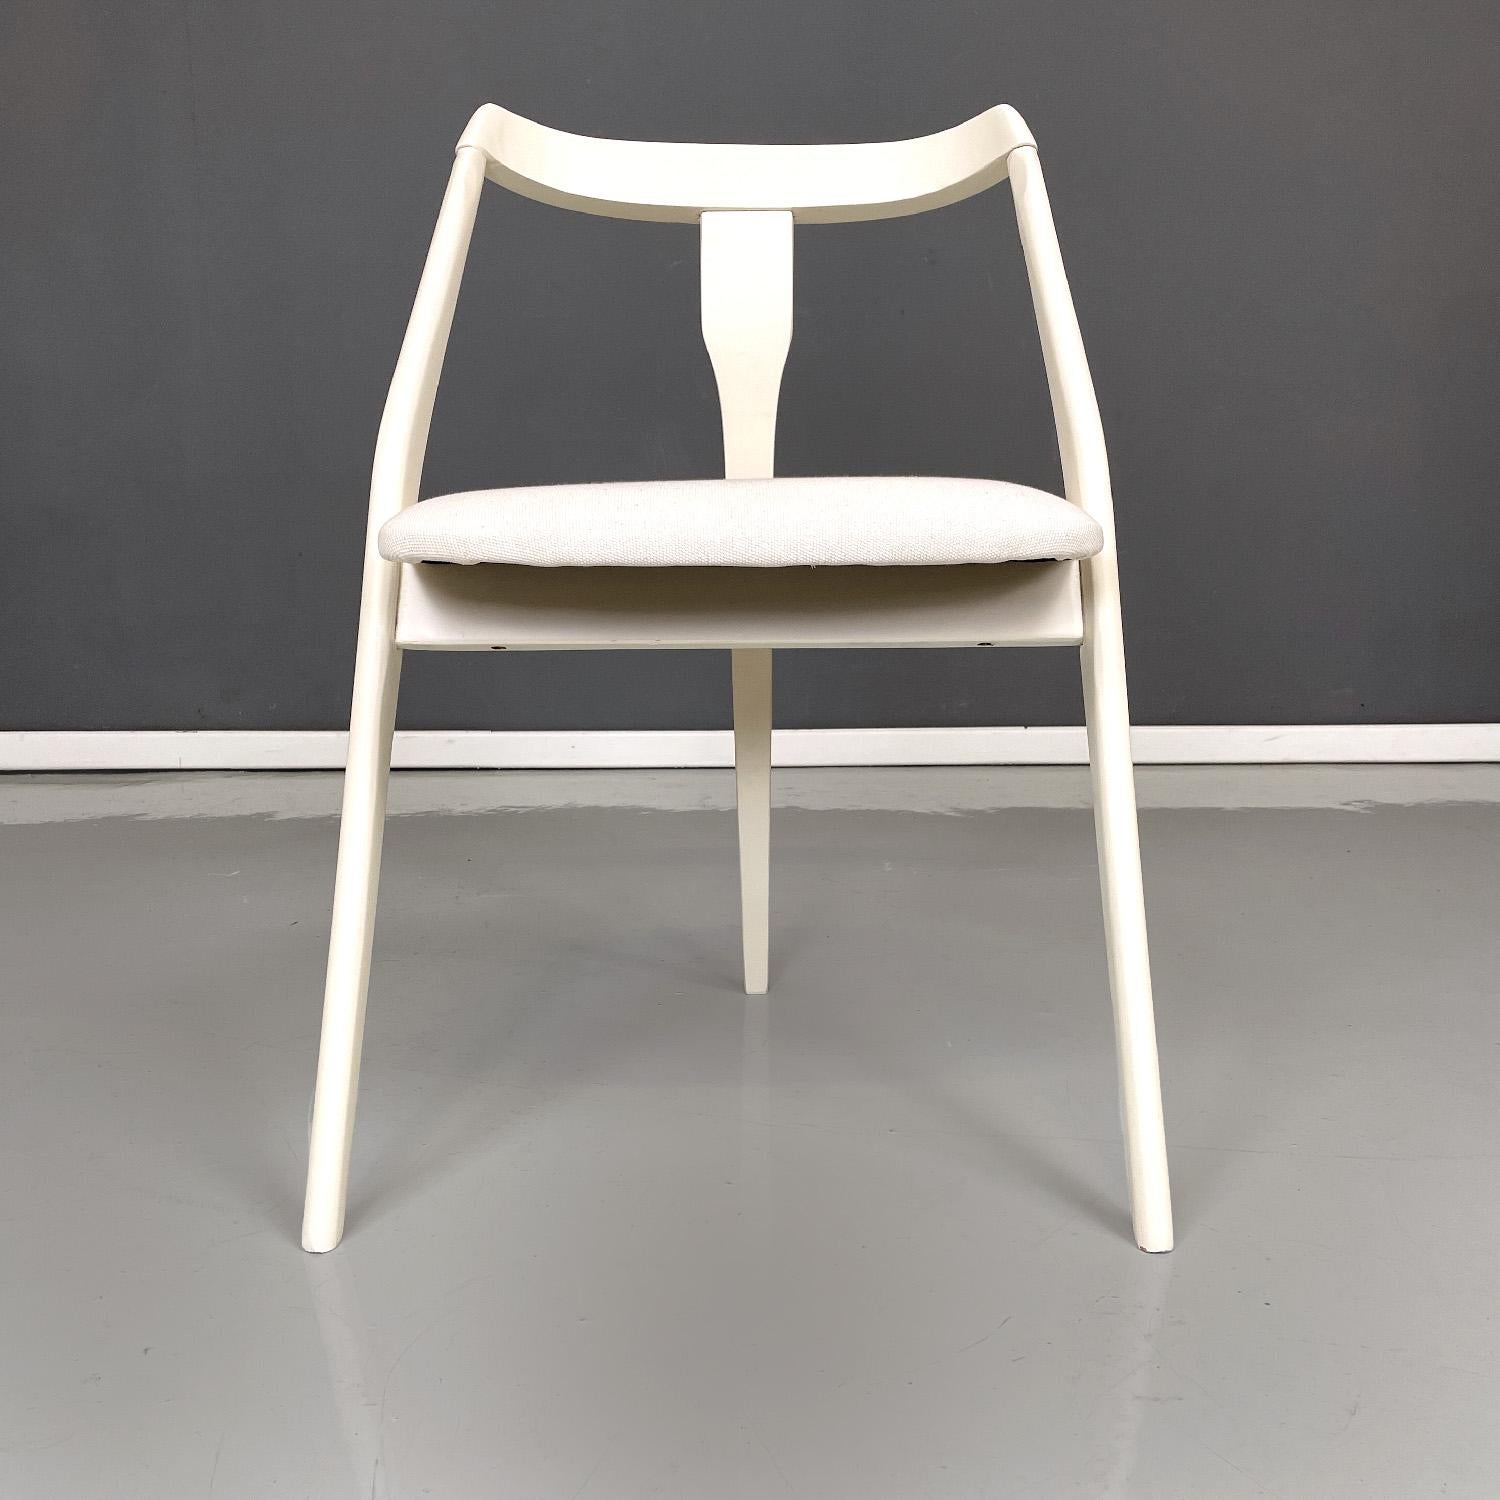 Mid-20th Century Italian mid-century modern white wood and fabric chairs, 1960s For Sale